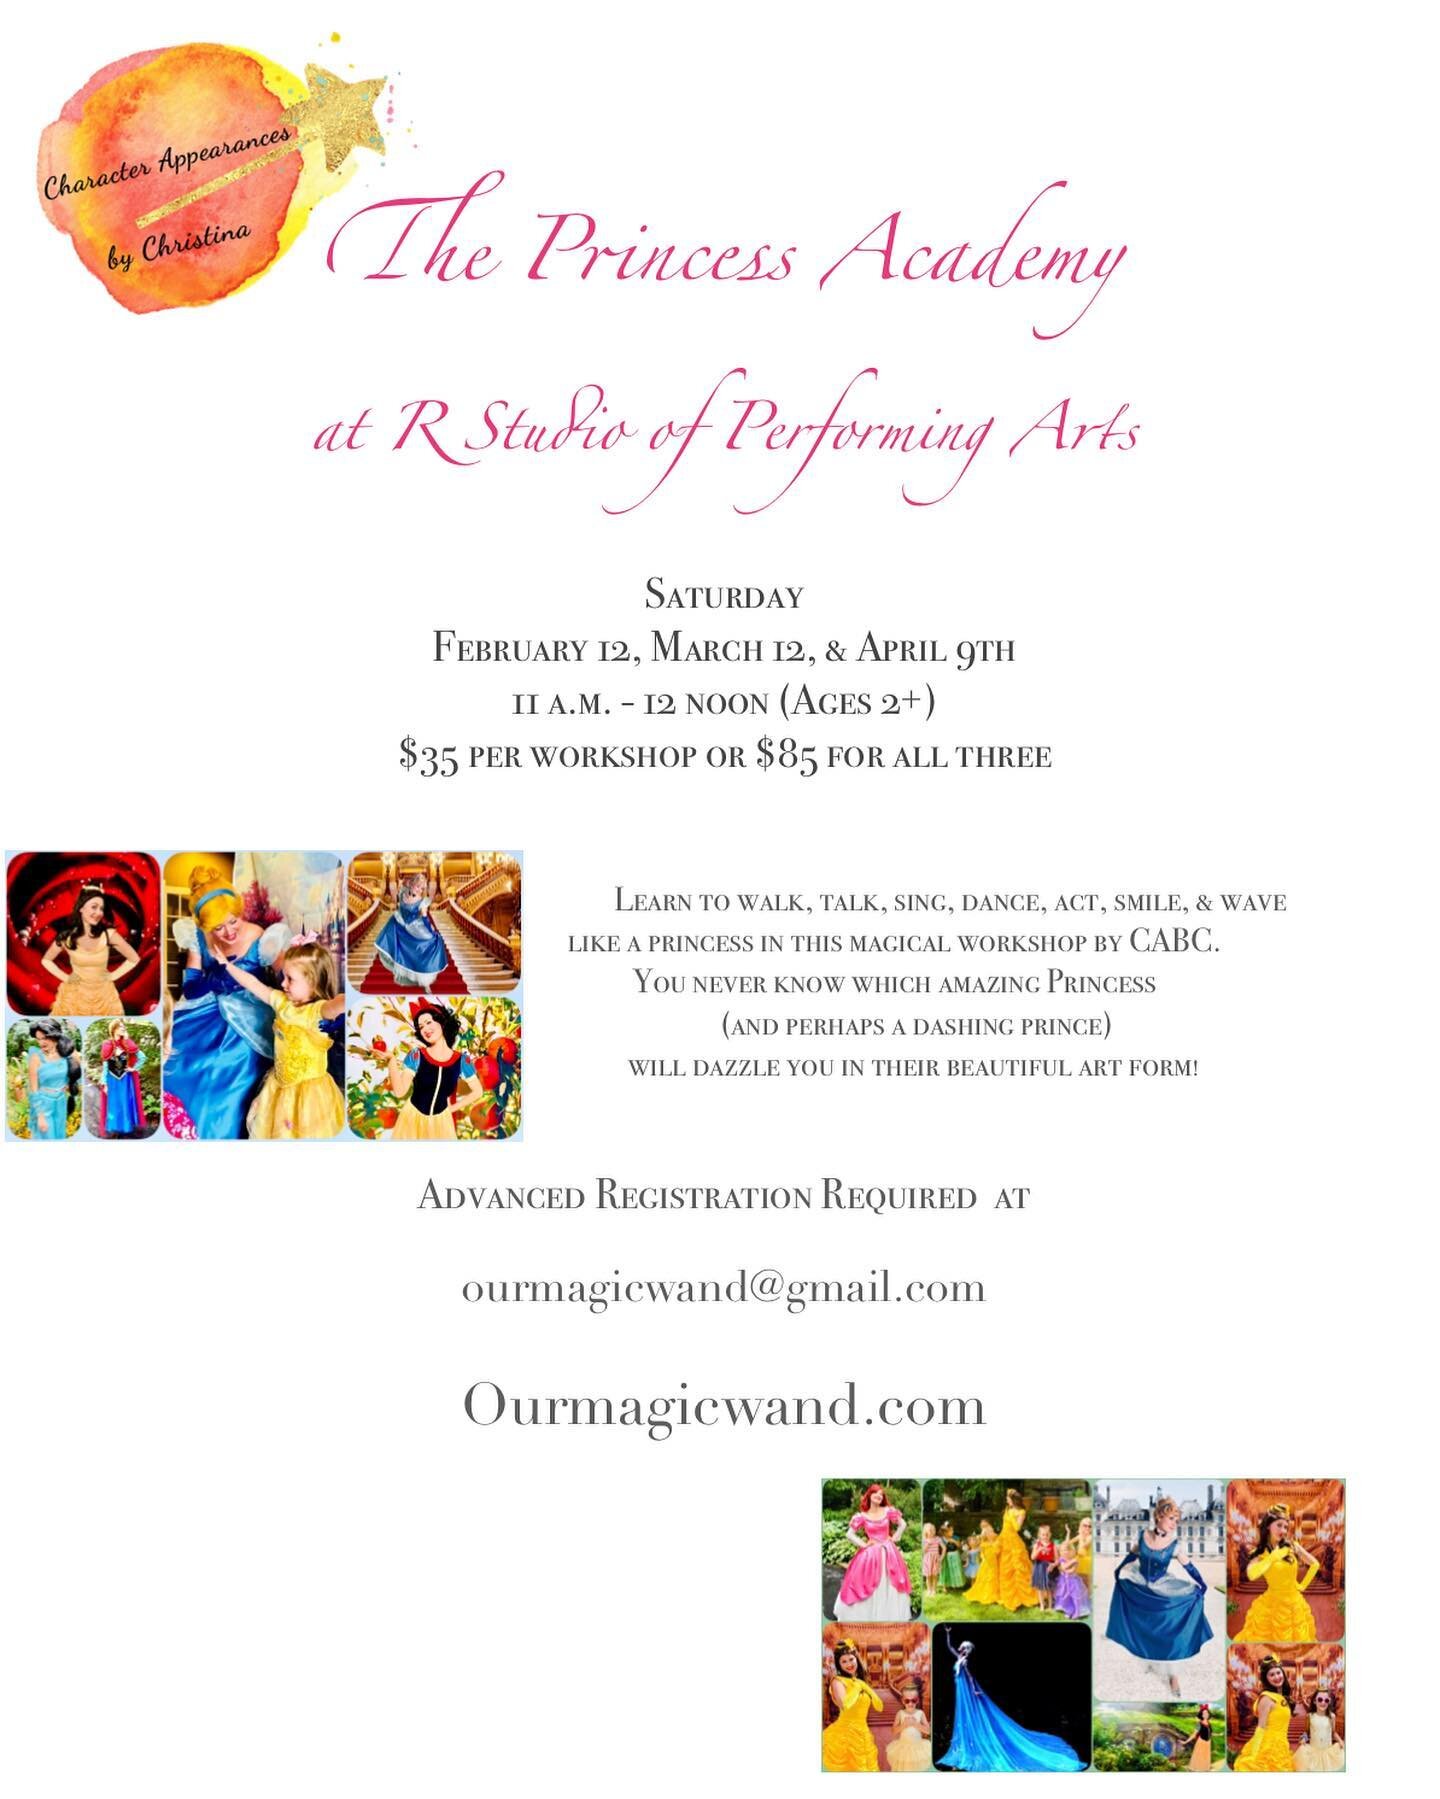 Don&rsquo;t forget to register by 3/10 for The Princess Academy at R Studio on 3/12! Ourmagicwand@gmail.com  #magicalmomentsbyCABC